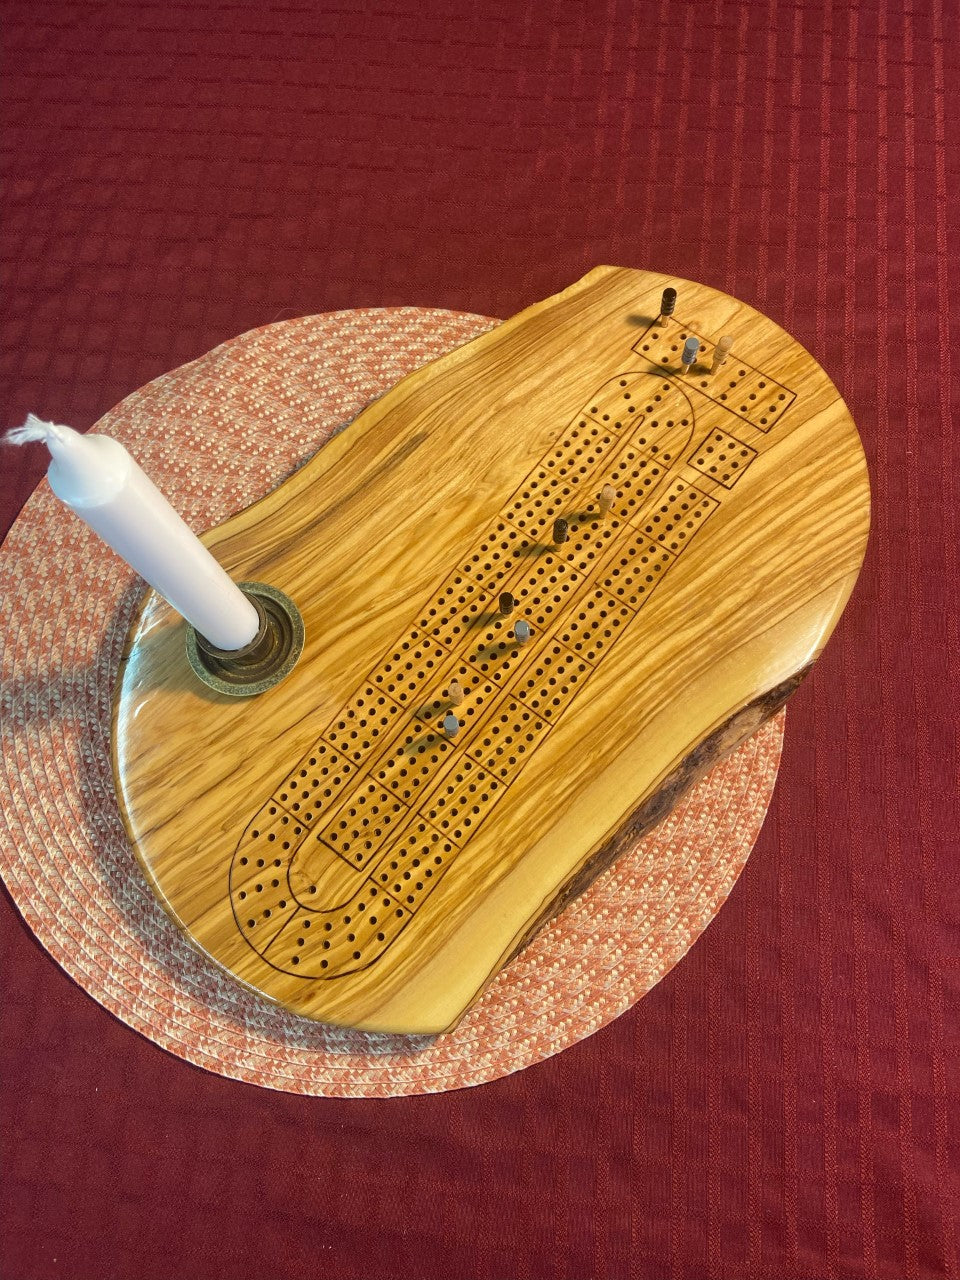 Olivewood Live Edge Cribbage Board with Candle Holder